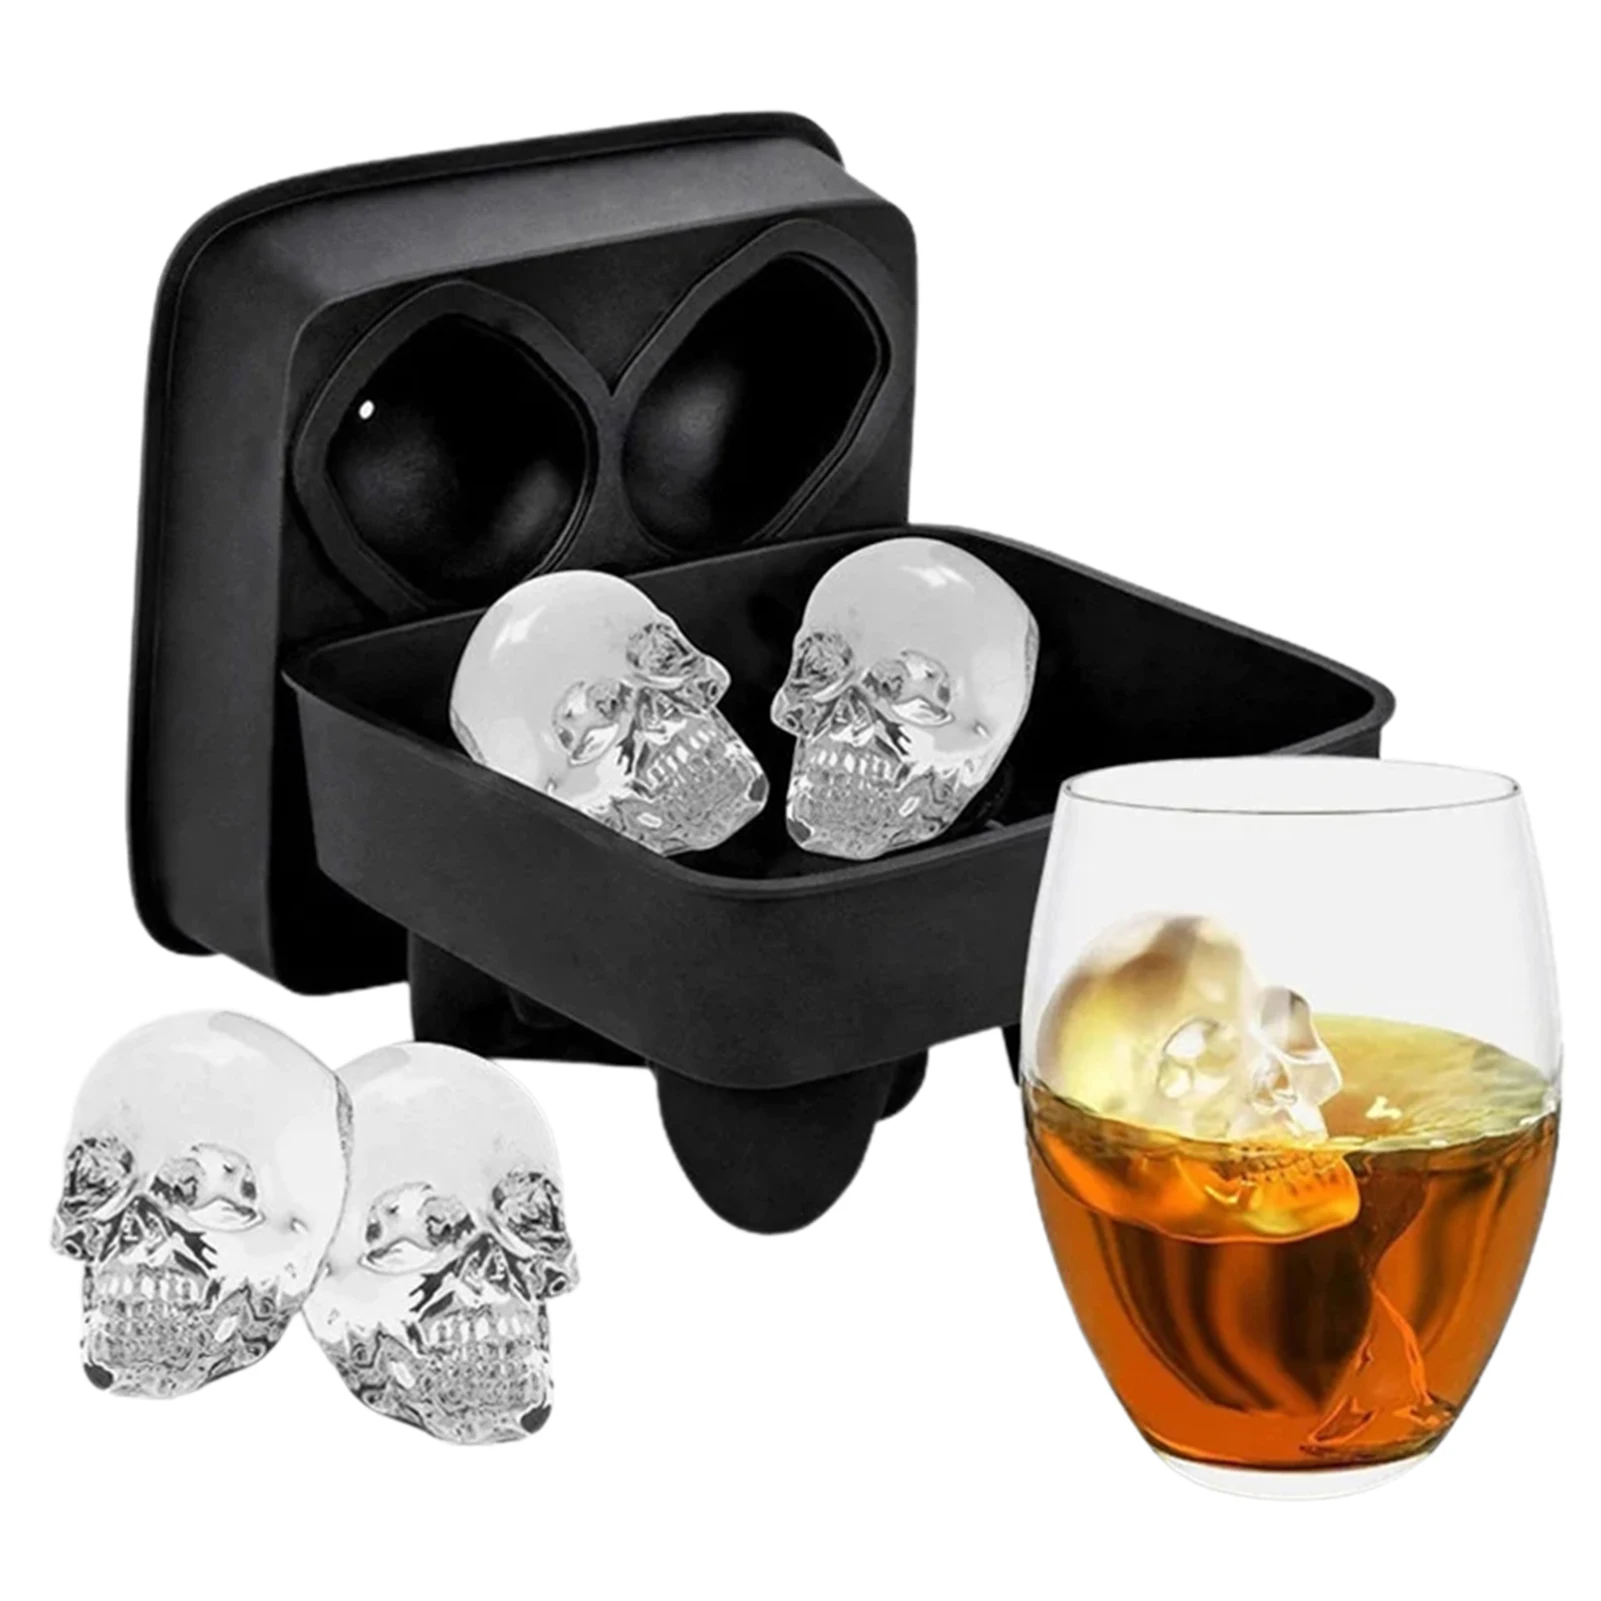 

Skull Silicone Mold 3D Flexible Silicone Ice Cubes Maker 4 Cavity Silicone Skull Ice Cube Molds For Whiskey Cocktails Beverages